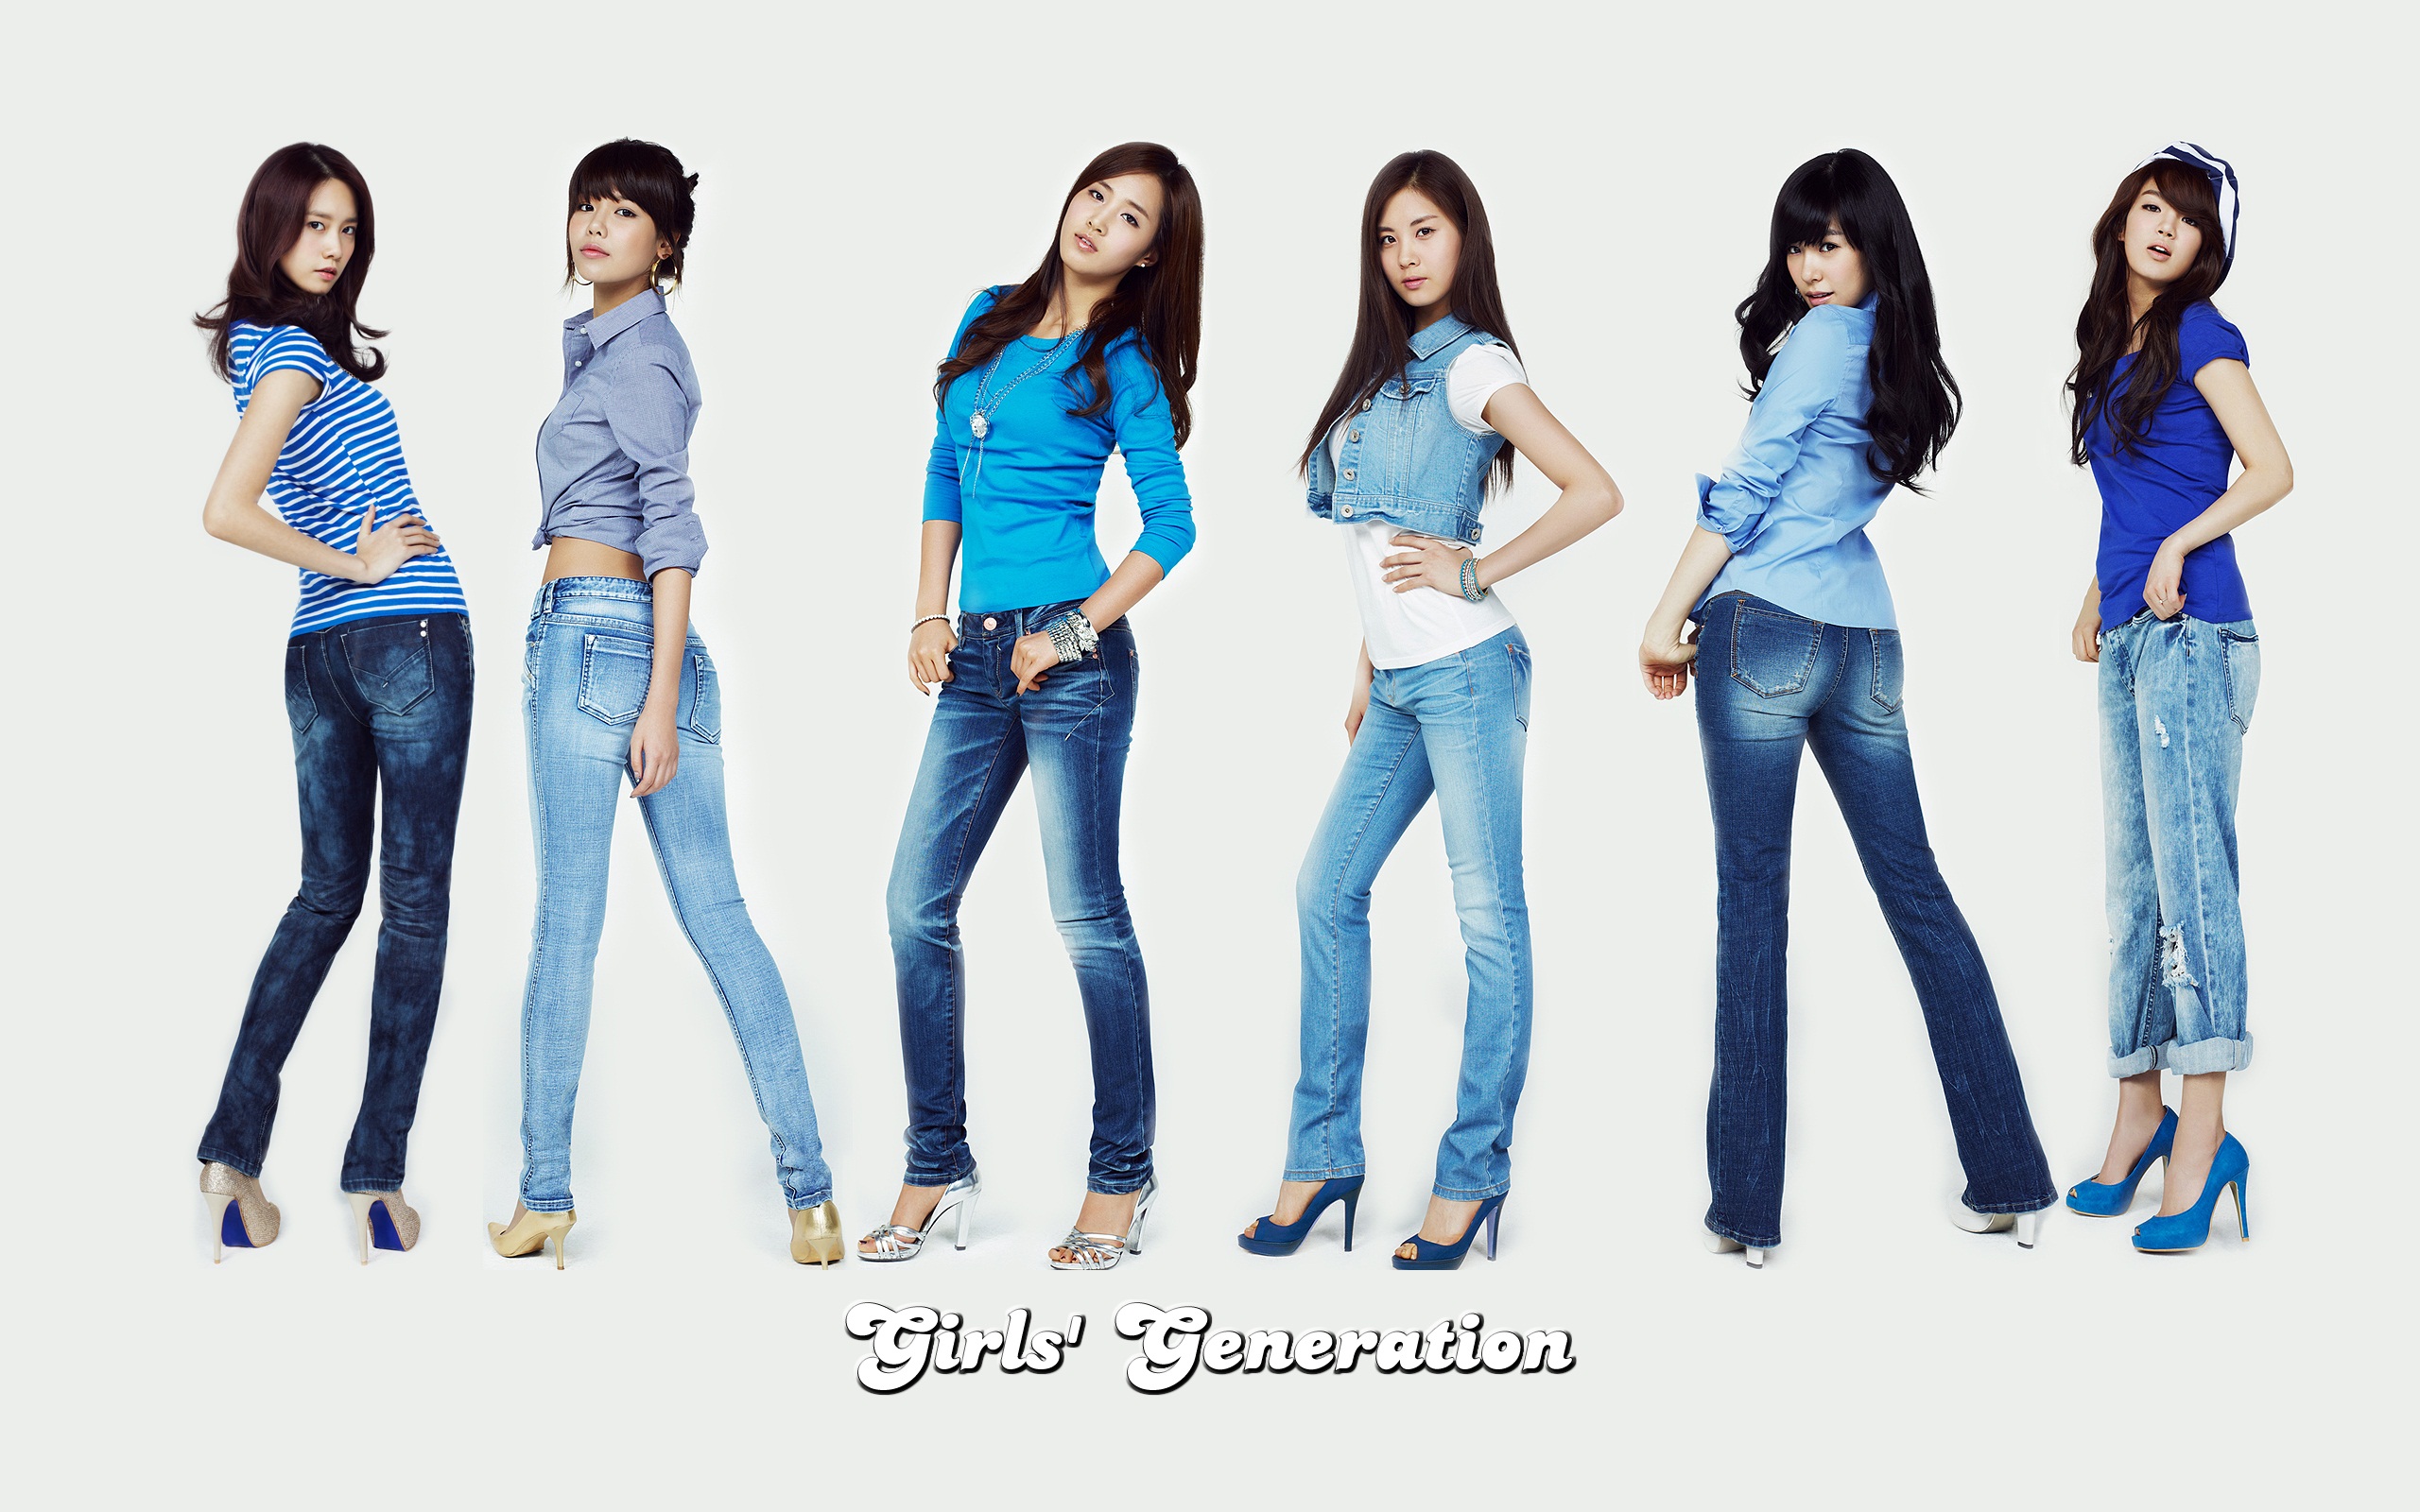 Girls Generation latest HD wallpapers collection #22 - 2560x1600